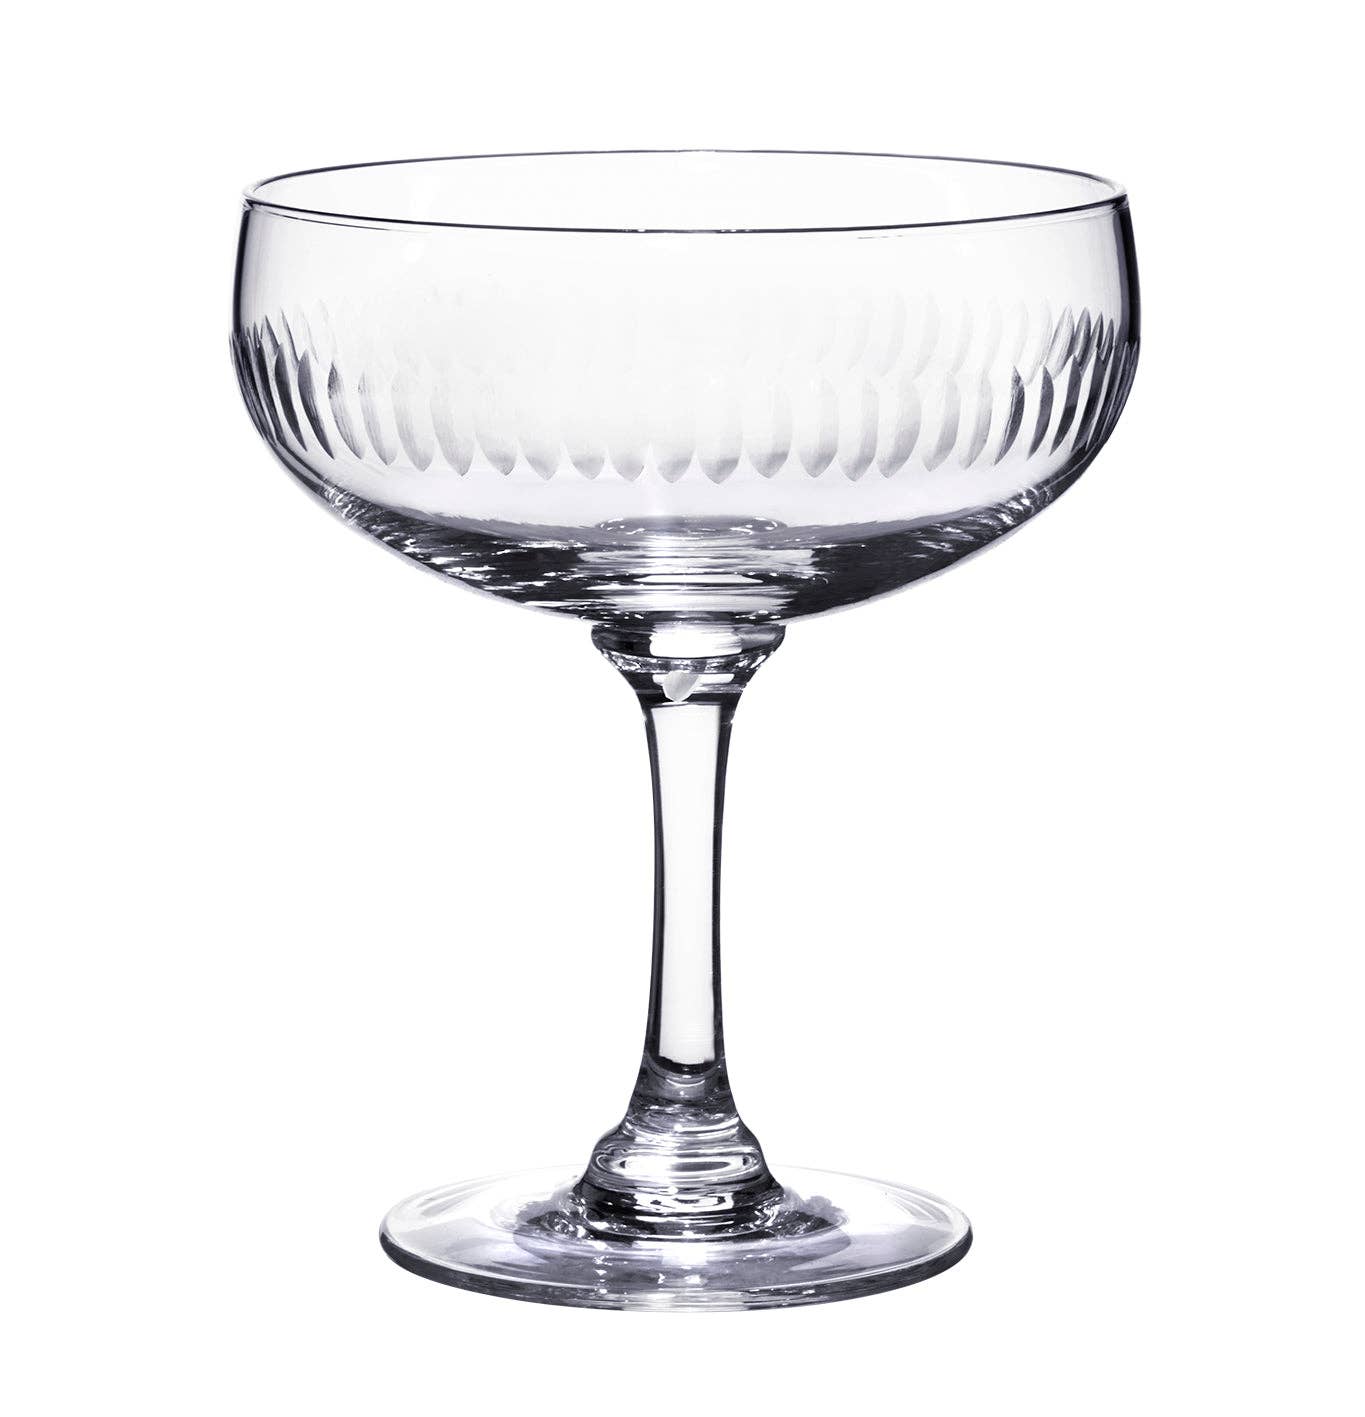 Elegant crystal cocktail glasses with a unique spears design, set of four